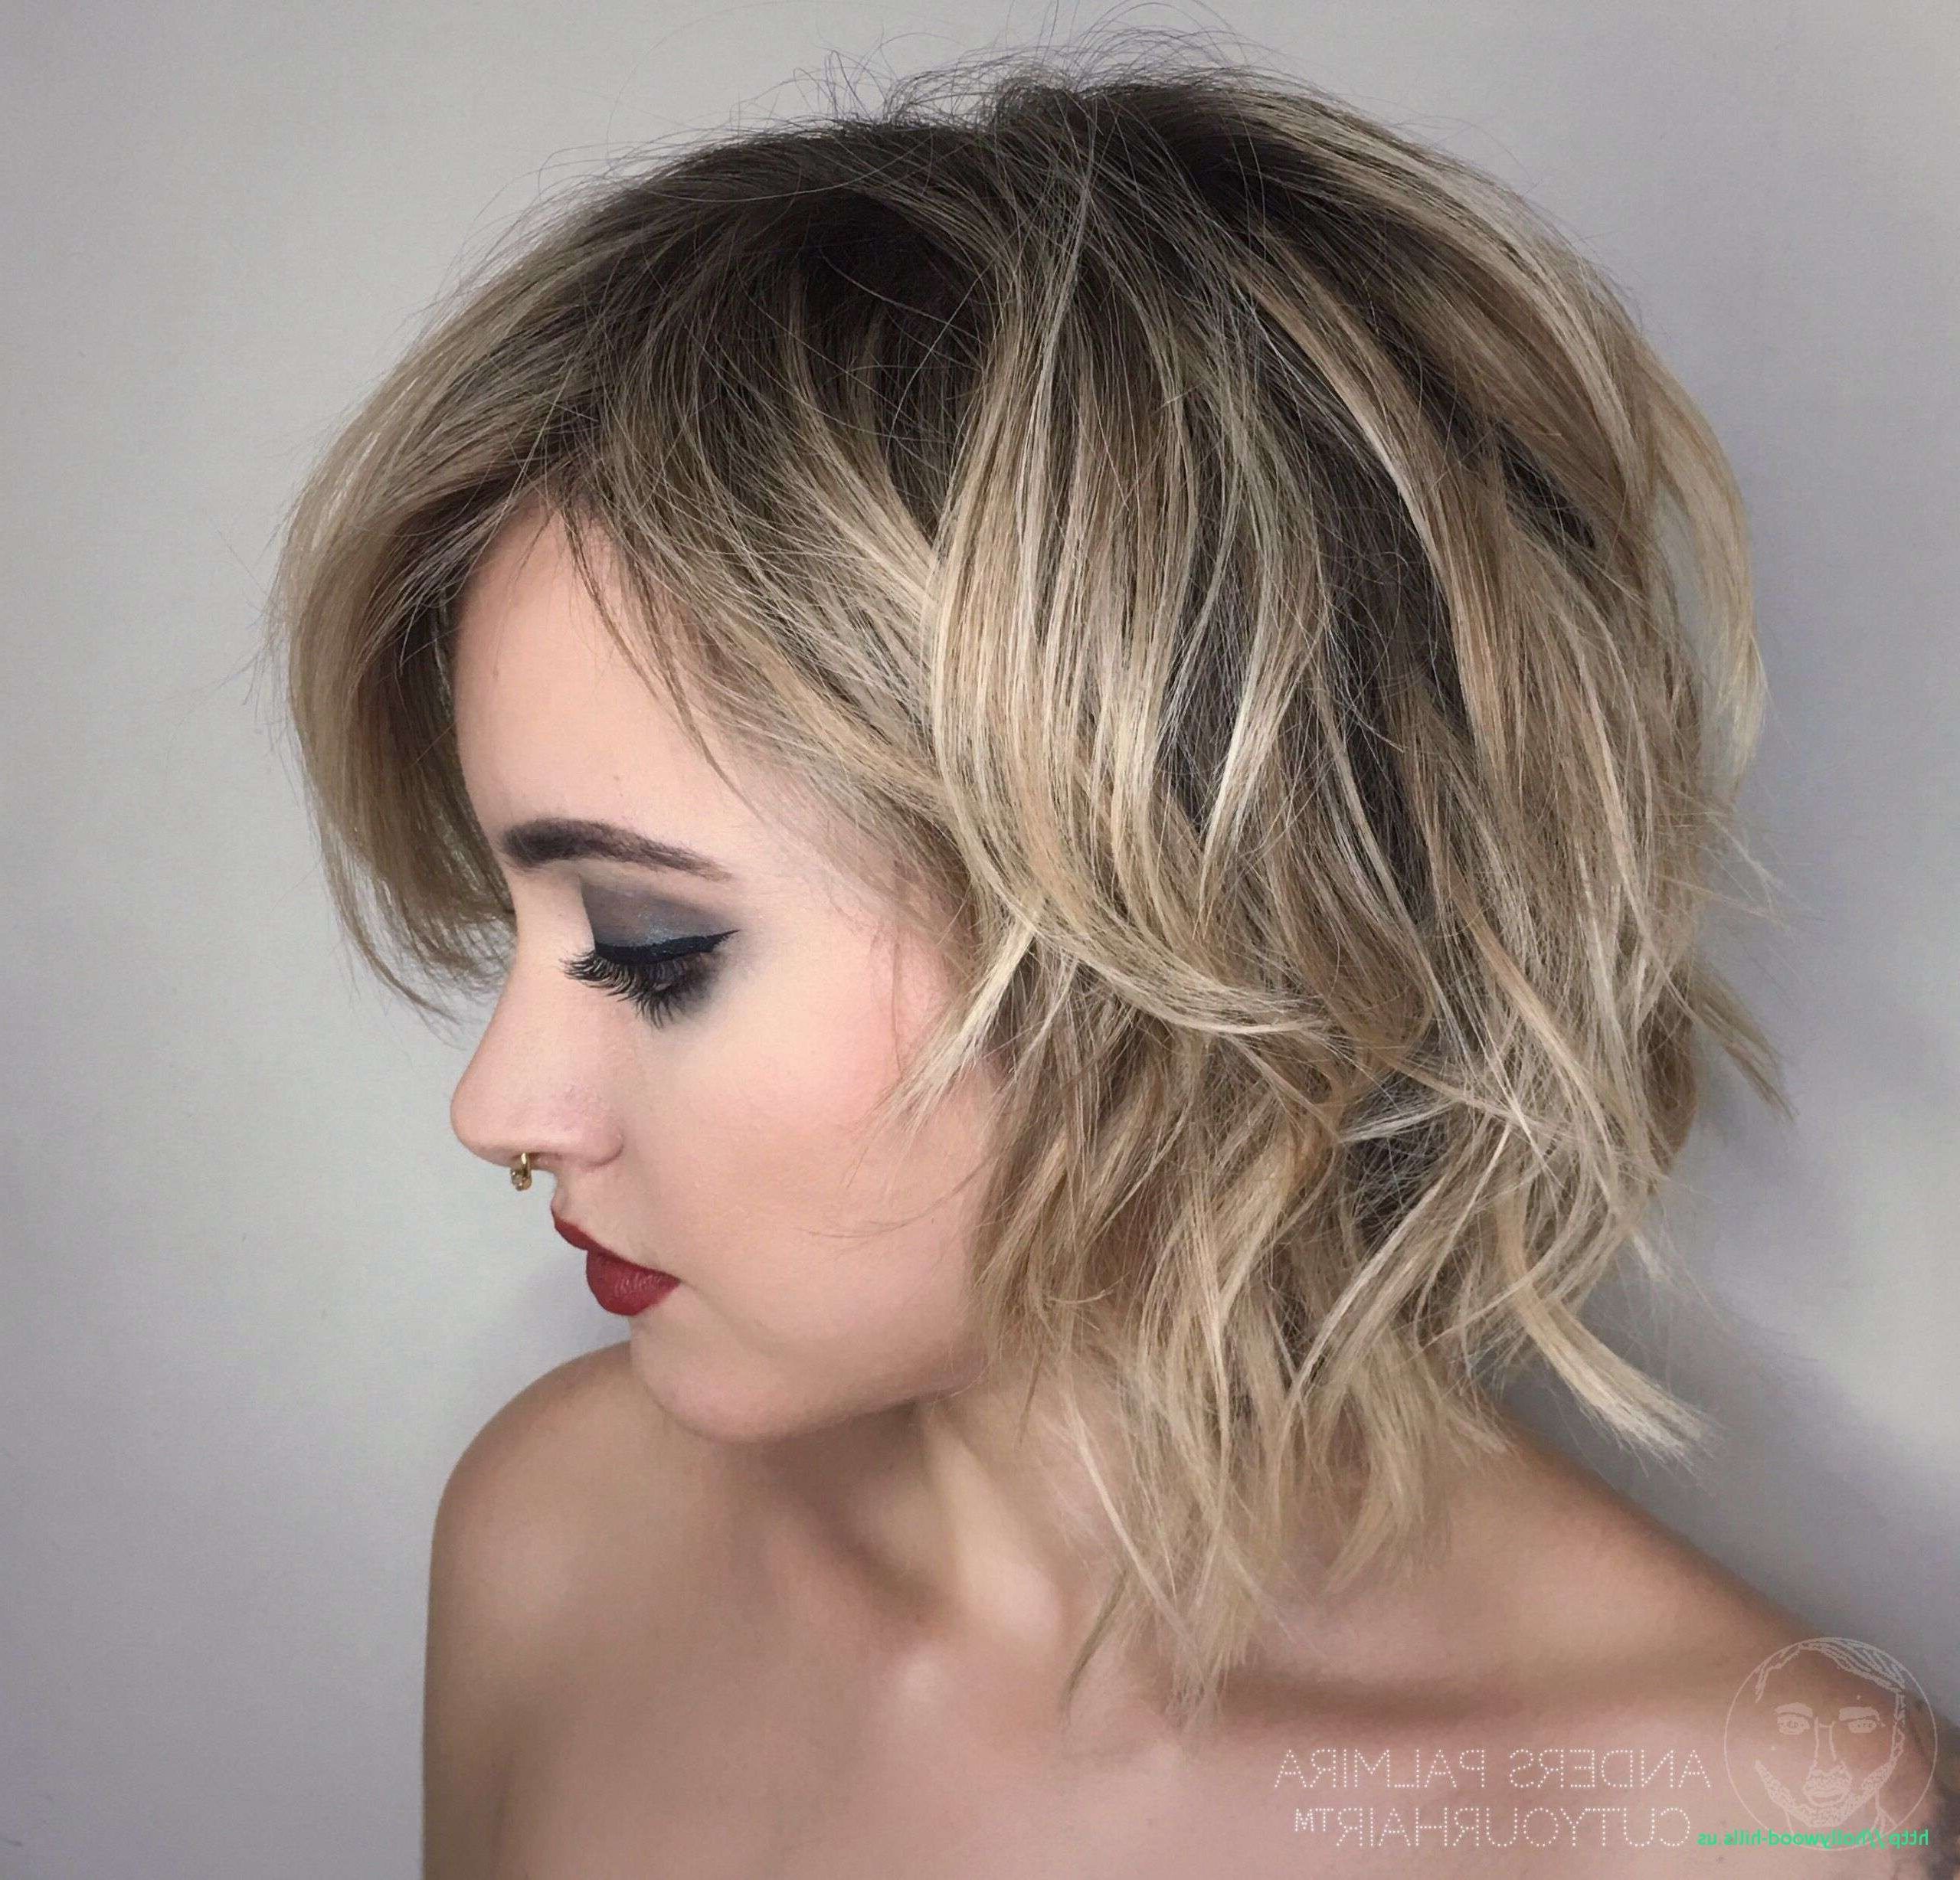 23 Haircuts For Medium Length Thin Hair 2019 Throughout Popular Short And Medium Layers Haircuts For Fine Hair (View 14 of 20)